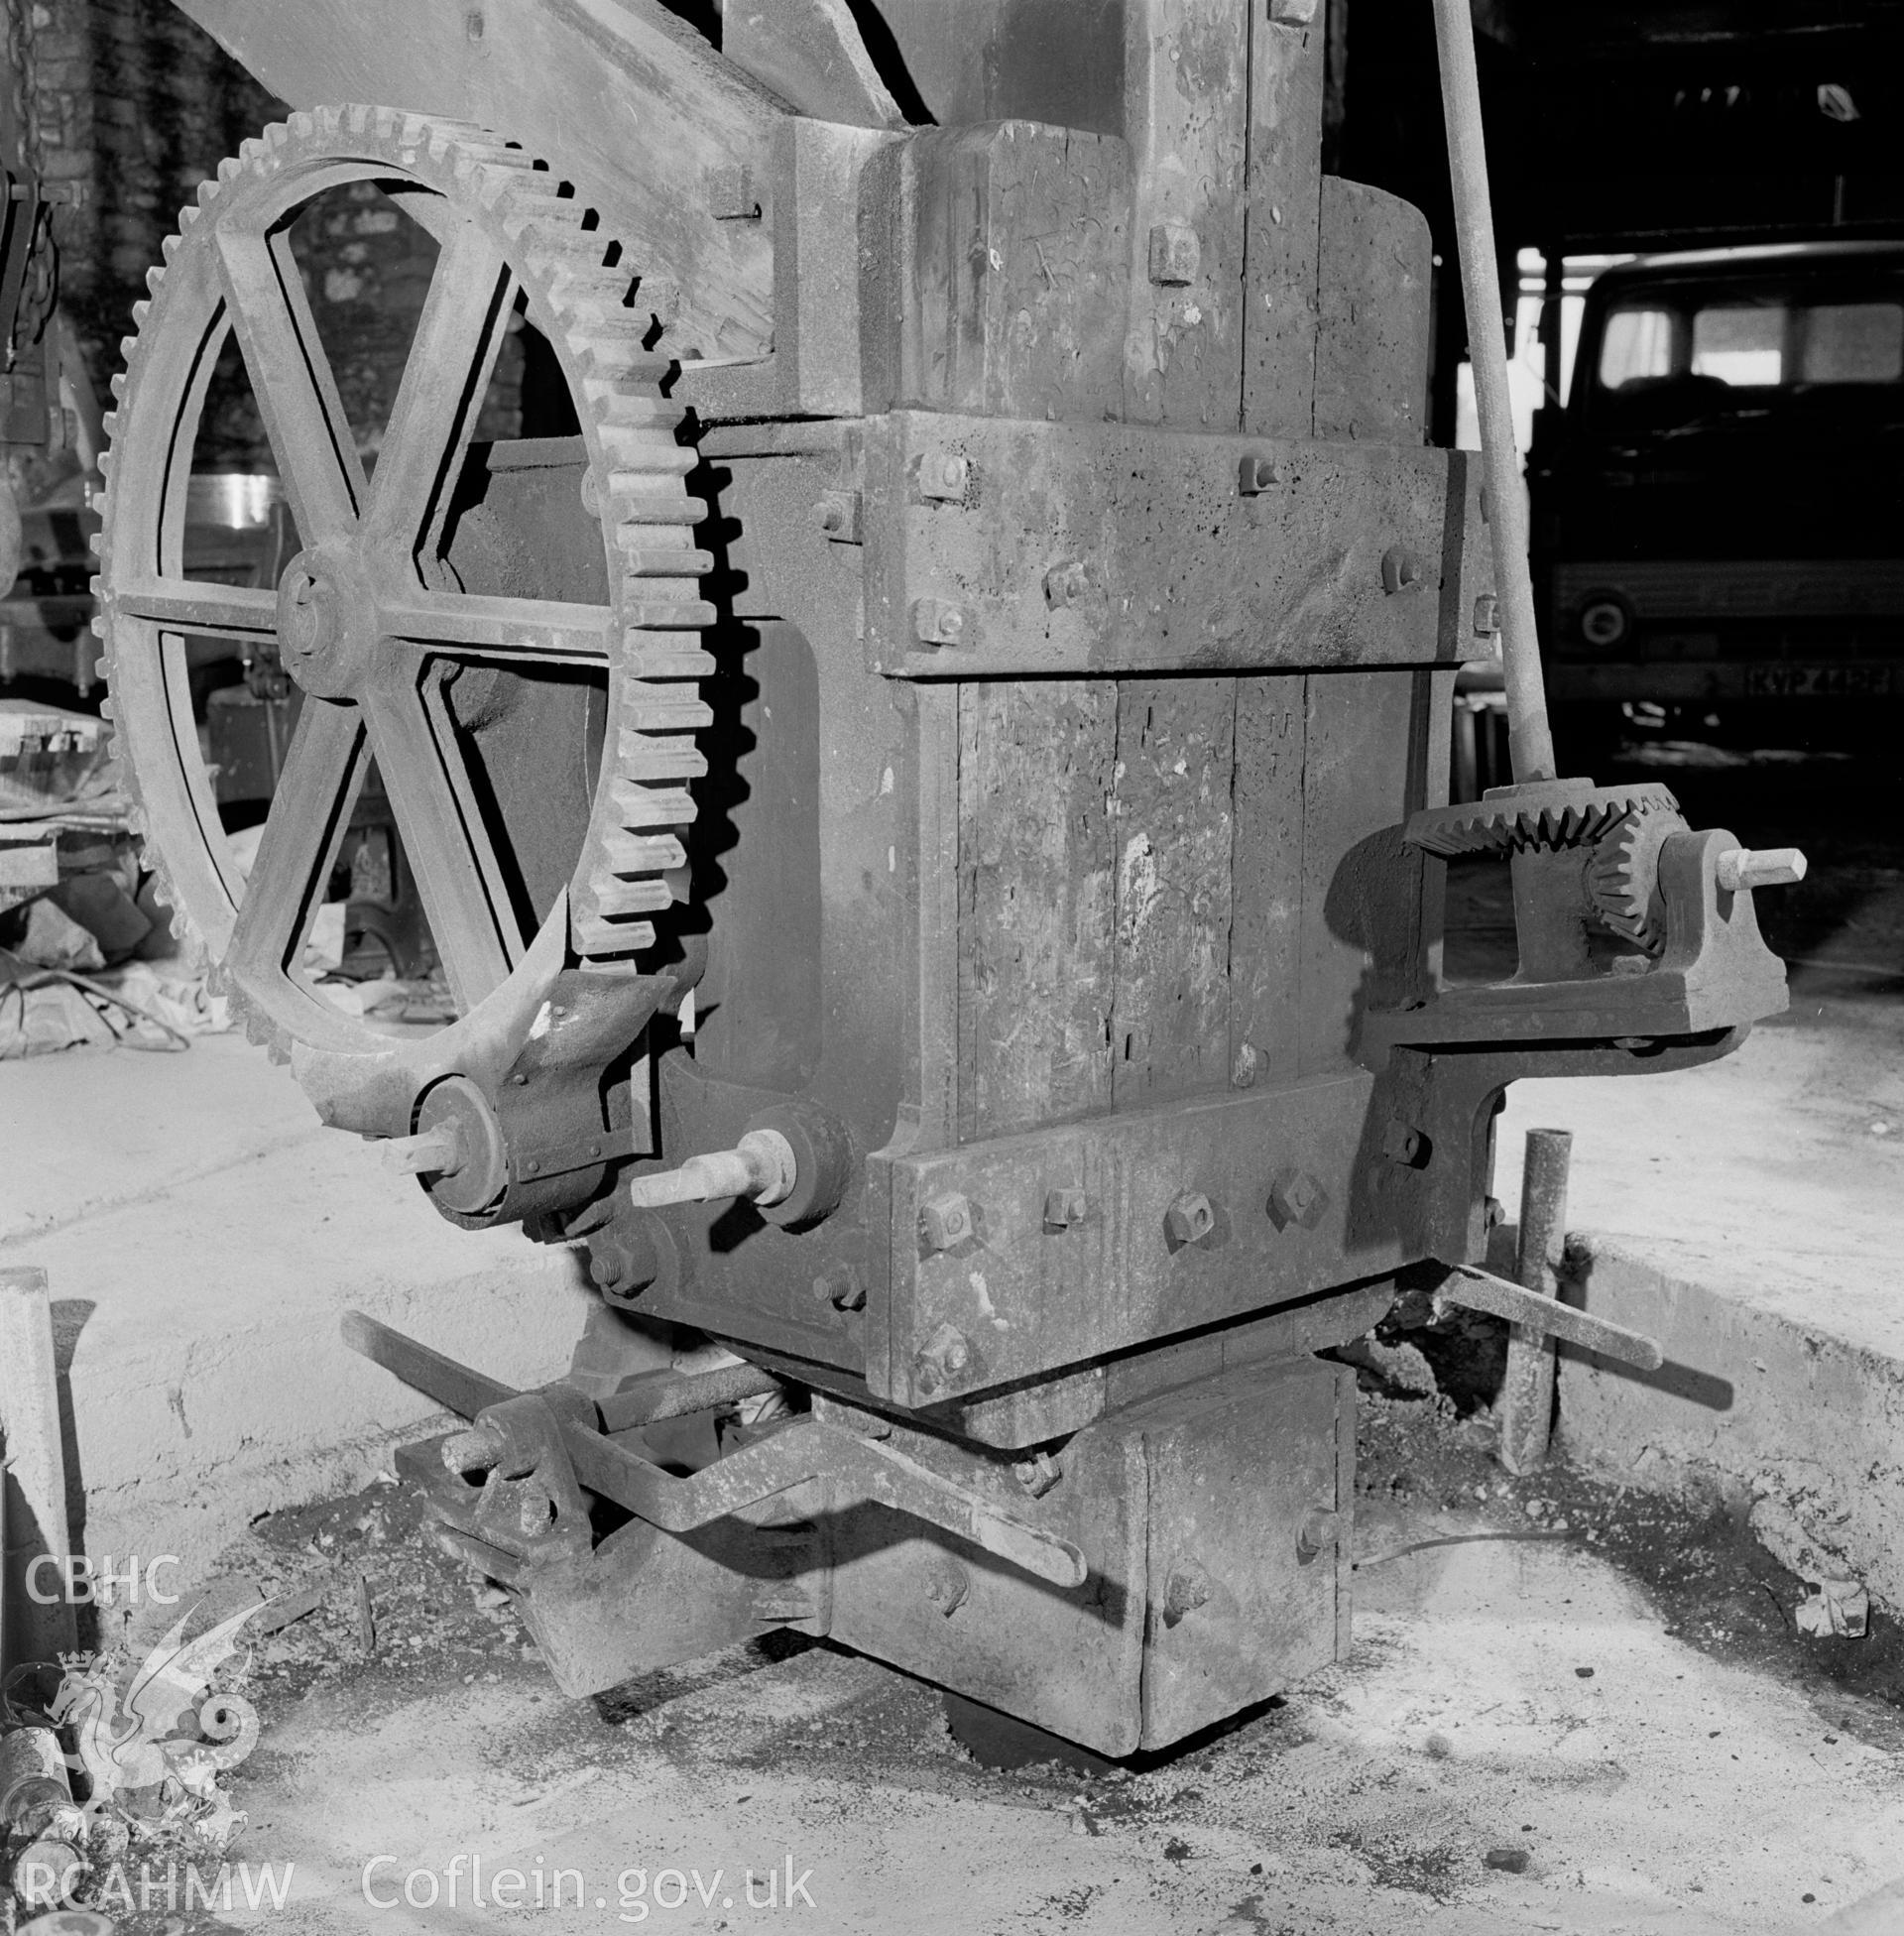 Digital copy of a black and white negative showing detail of the crane at Player's Works Foundry, Clydach, taken by RCAHMW, undated.